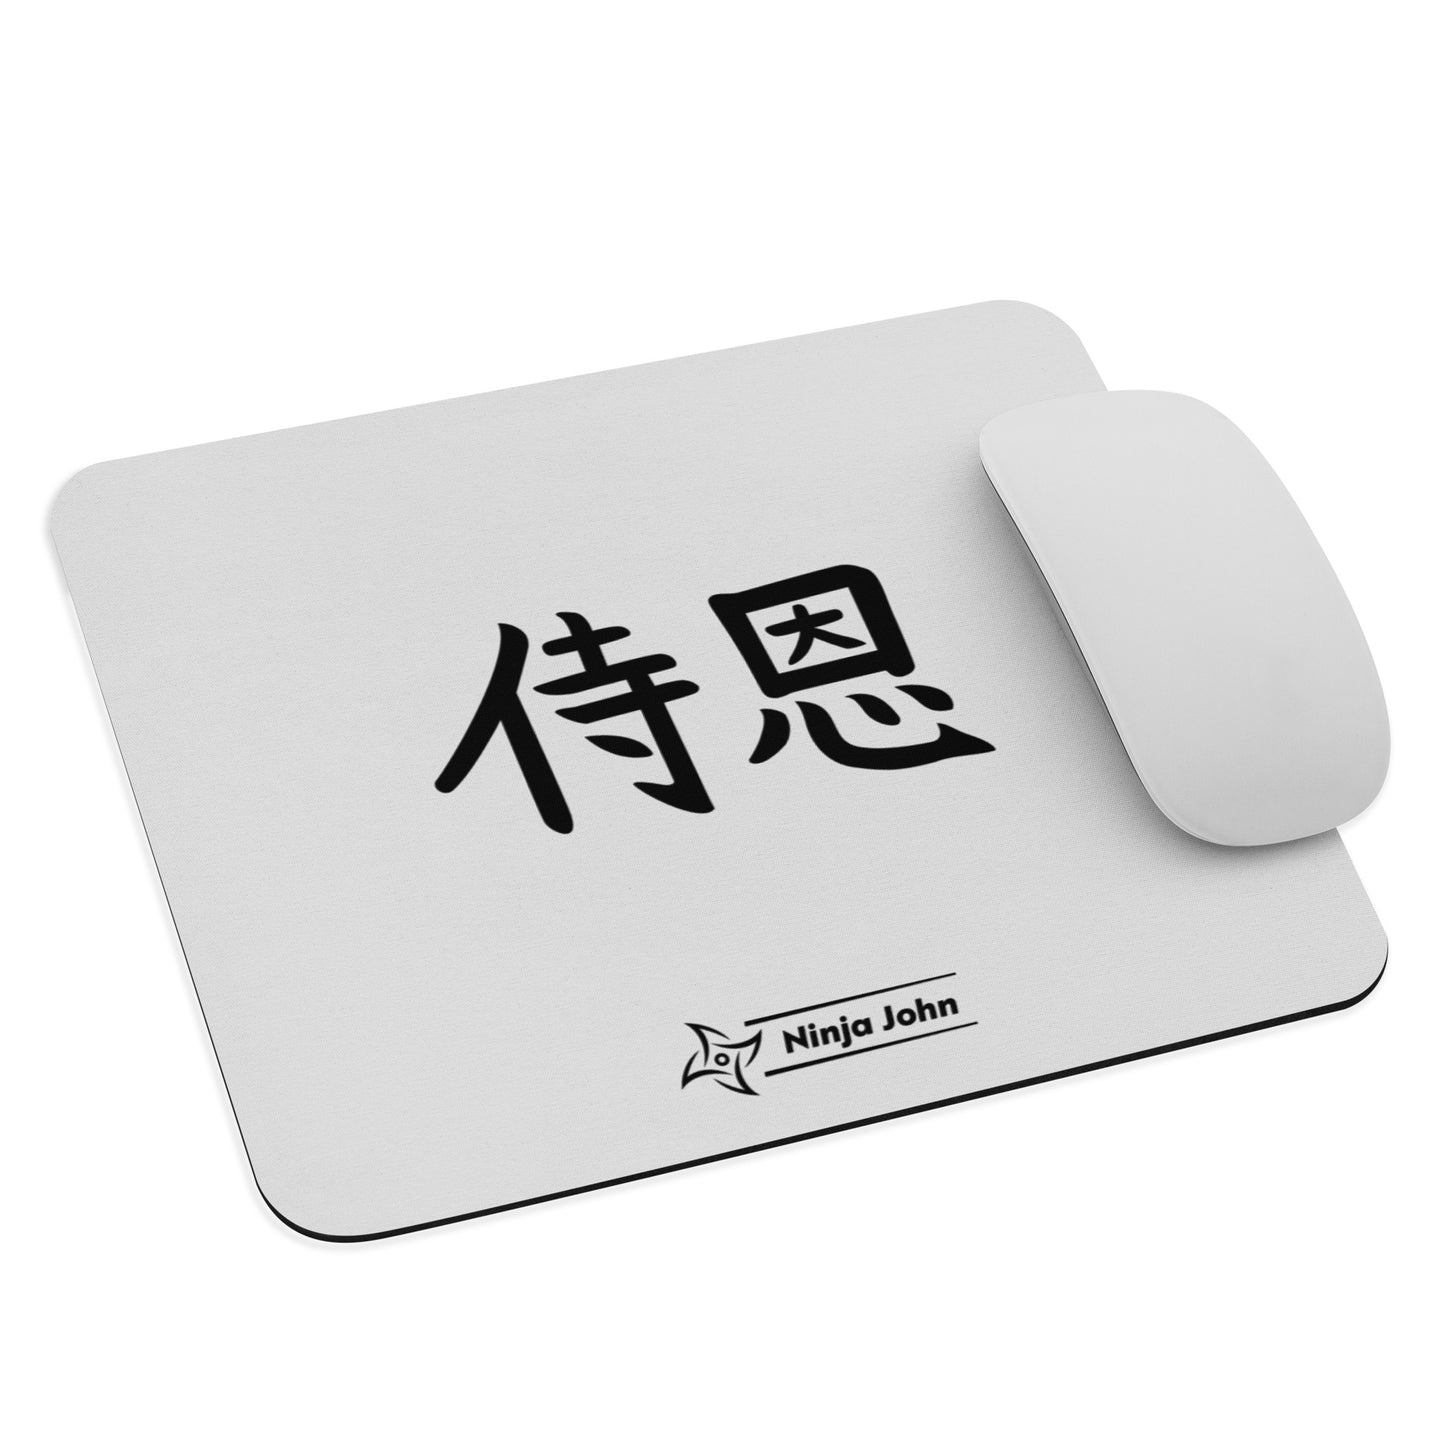 "John" in Japanese Kanji, Mouse pad (Light color, Left to right writing)